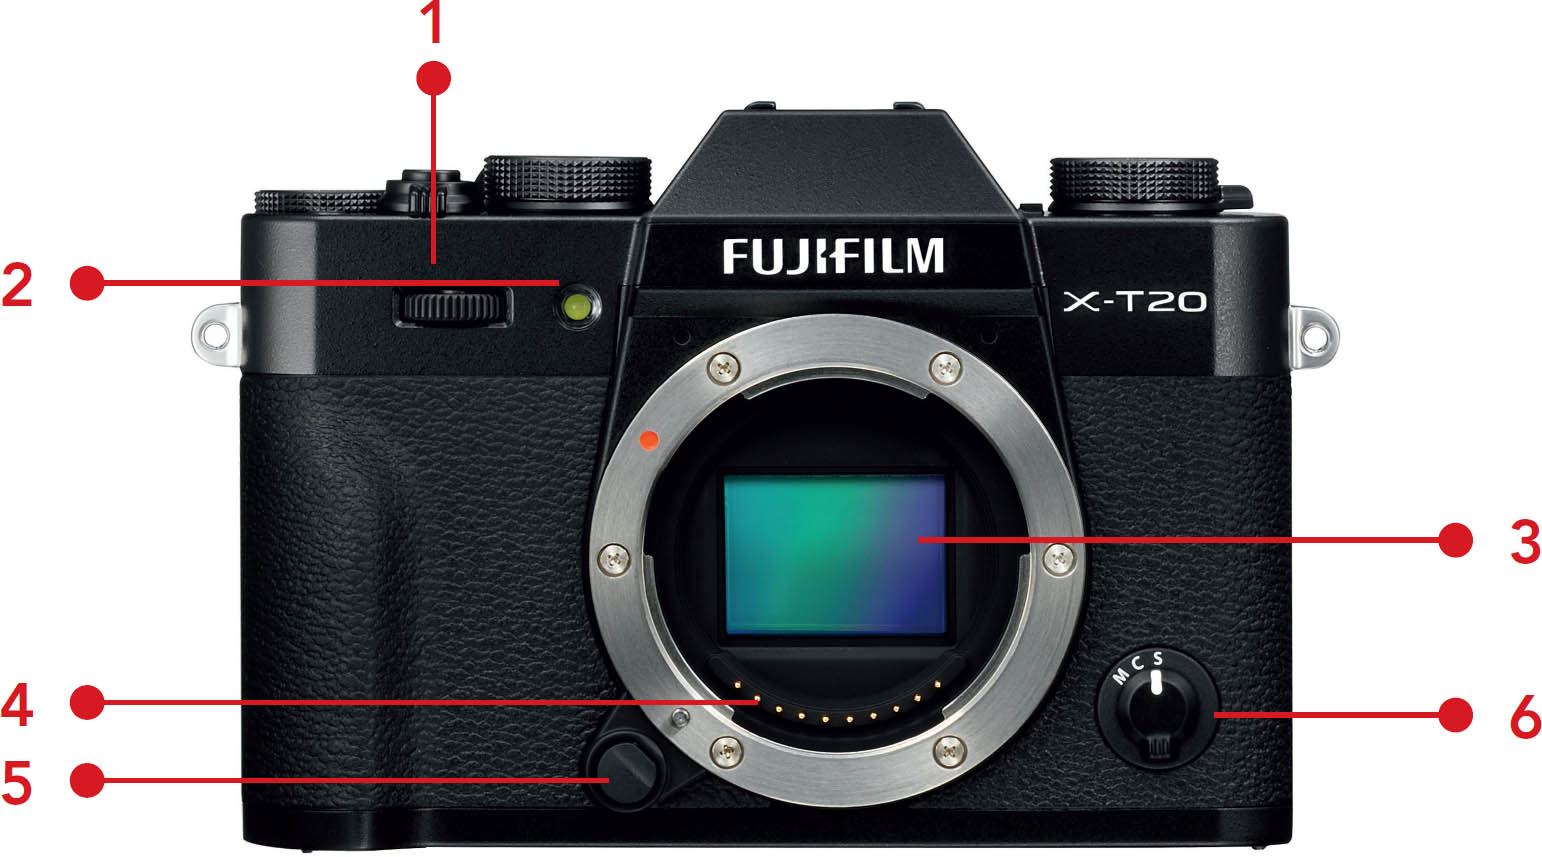 1. Your X-T20 System - The Fujifilm X-T20 [Book]